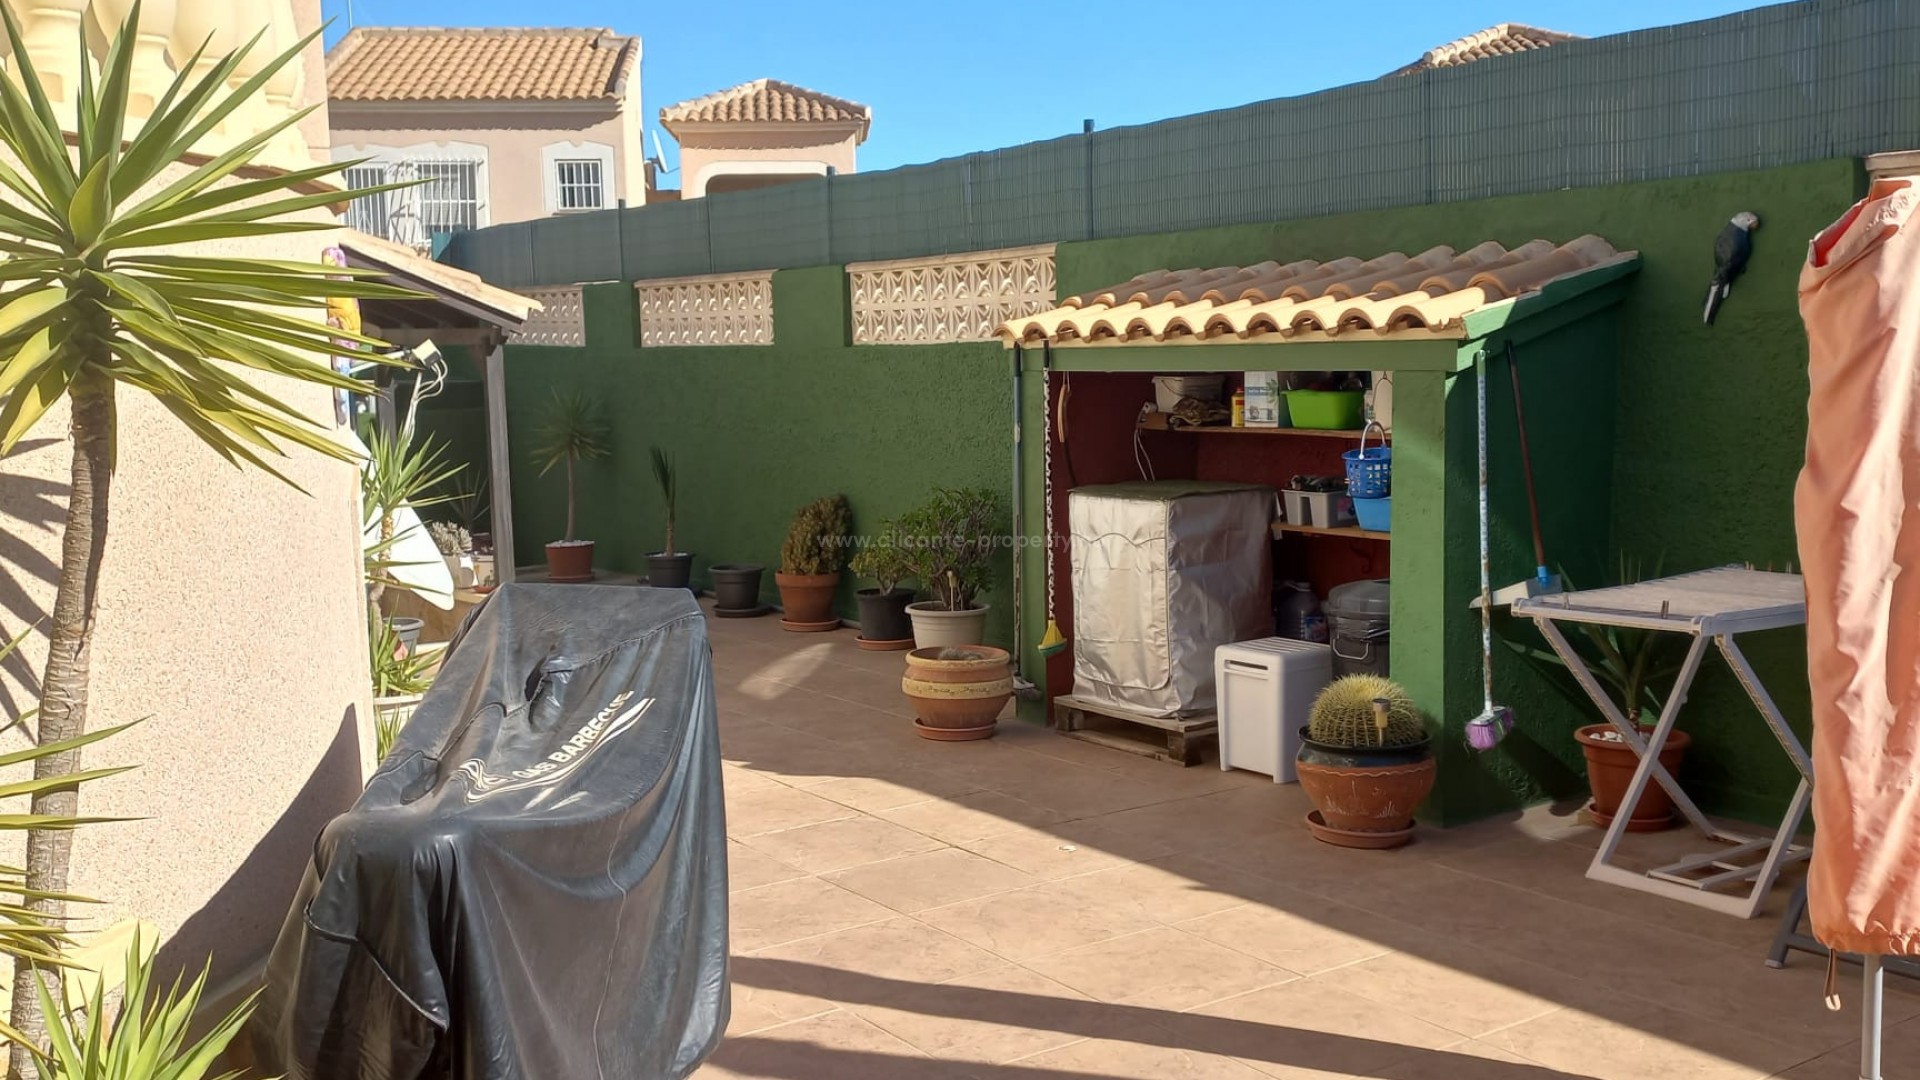 Equity release home/house/villa in Quesada, Rojales, Alicante, 4 bedrooms, 2 bathrooms, private garden with hot tub, communal pool, close to several golf courses